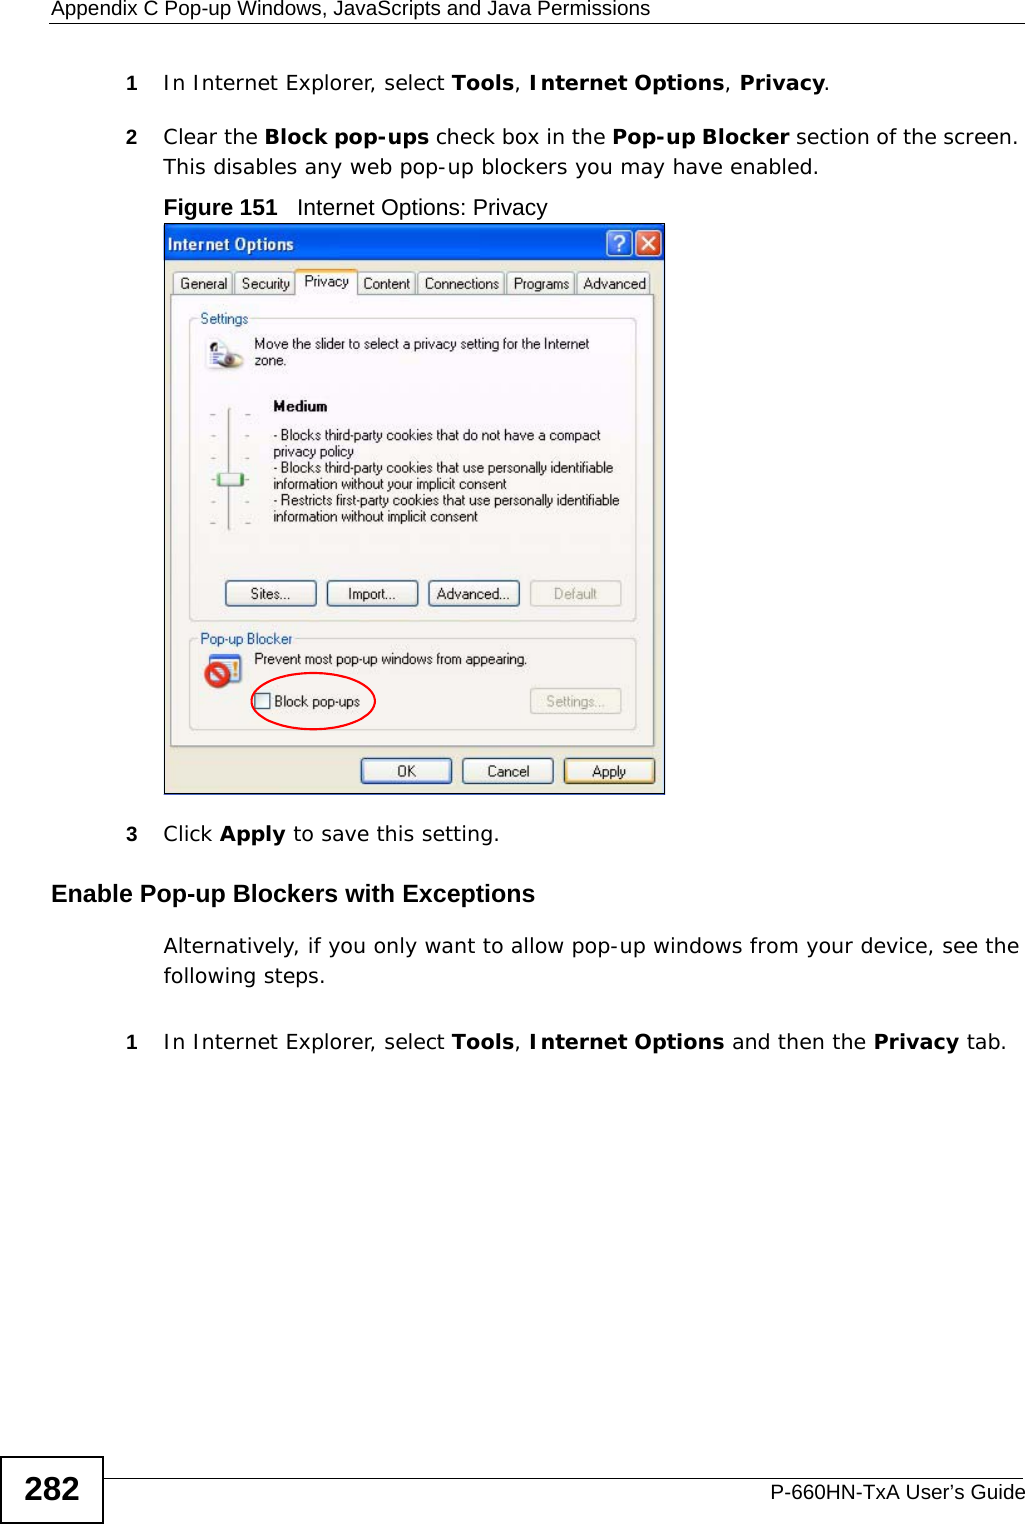 Appendix C Pop-up Windows, JavaScripts and Java PermissionsP-660HN-TxA User’s Guide2821In Internet Explorer, select Tools, Internet Options, Privacy.2Clear the Block pop-ups check box in the Pop-up Blocker section of the screen. This disables any web pop-up blockers you may have enabled. Figure 151   Internet Options: Privacy3Click Apply to save this setting.Enable Pop-up Blockers with ExceptionsAlternatively, if you only want to allow pop-up windows from your device, see the following steps.1In Internet Explorer, select Tools, Internet Options and then the Privacy tab. 